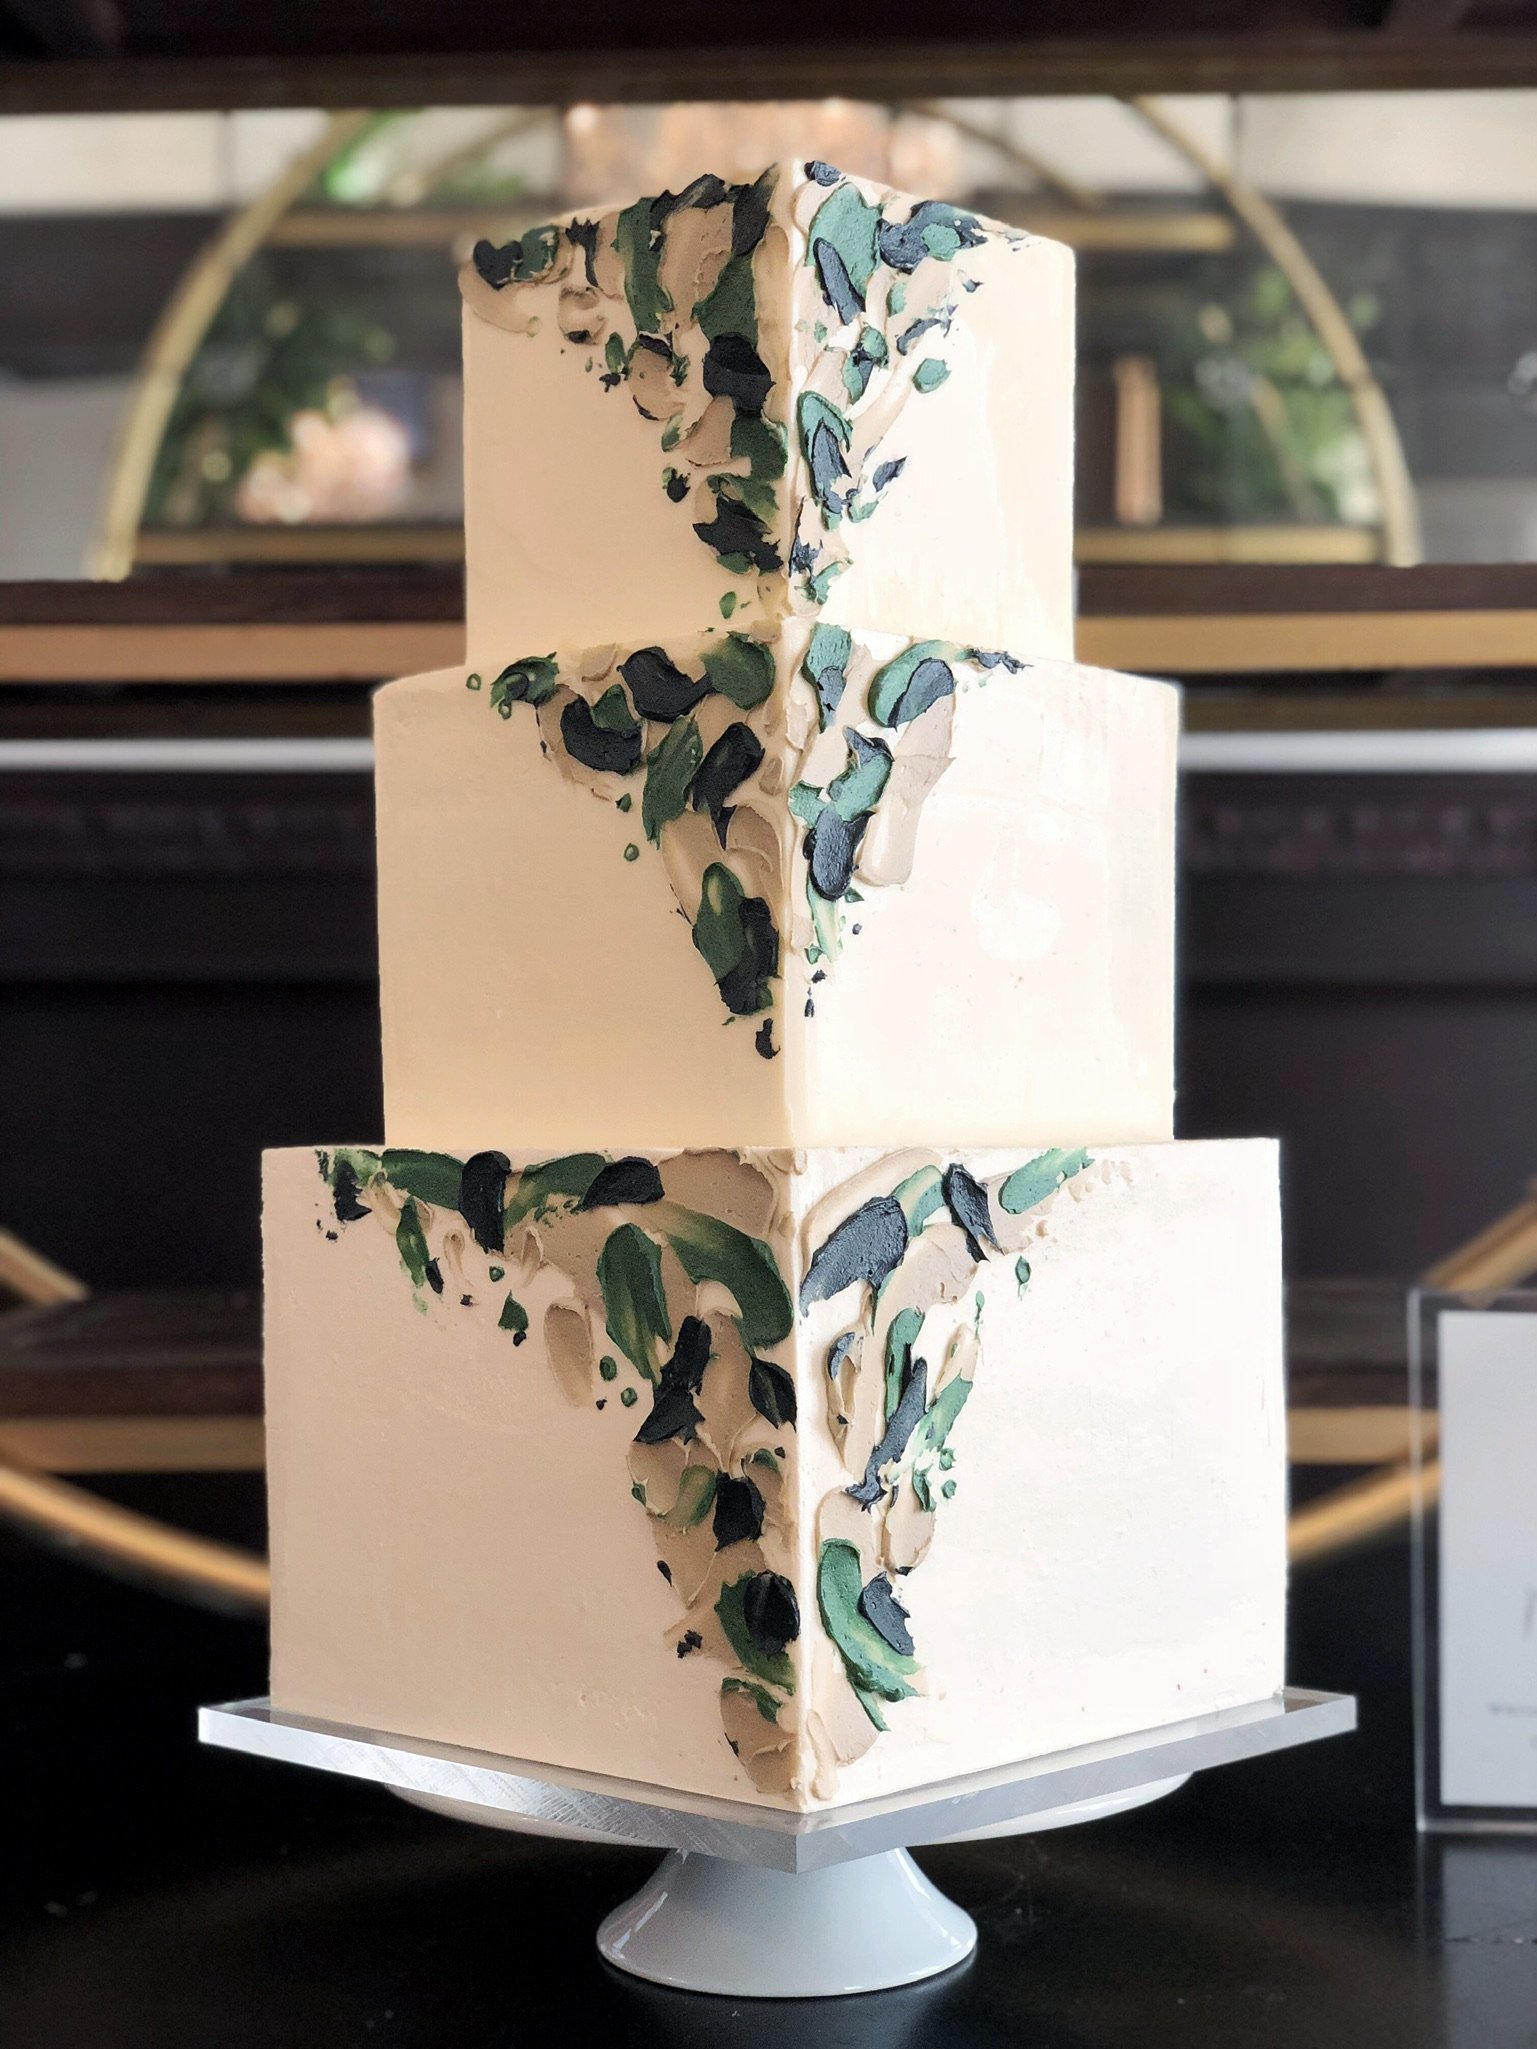 3-Tier Cake with paint design on the outside